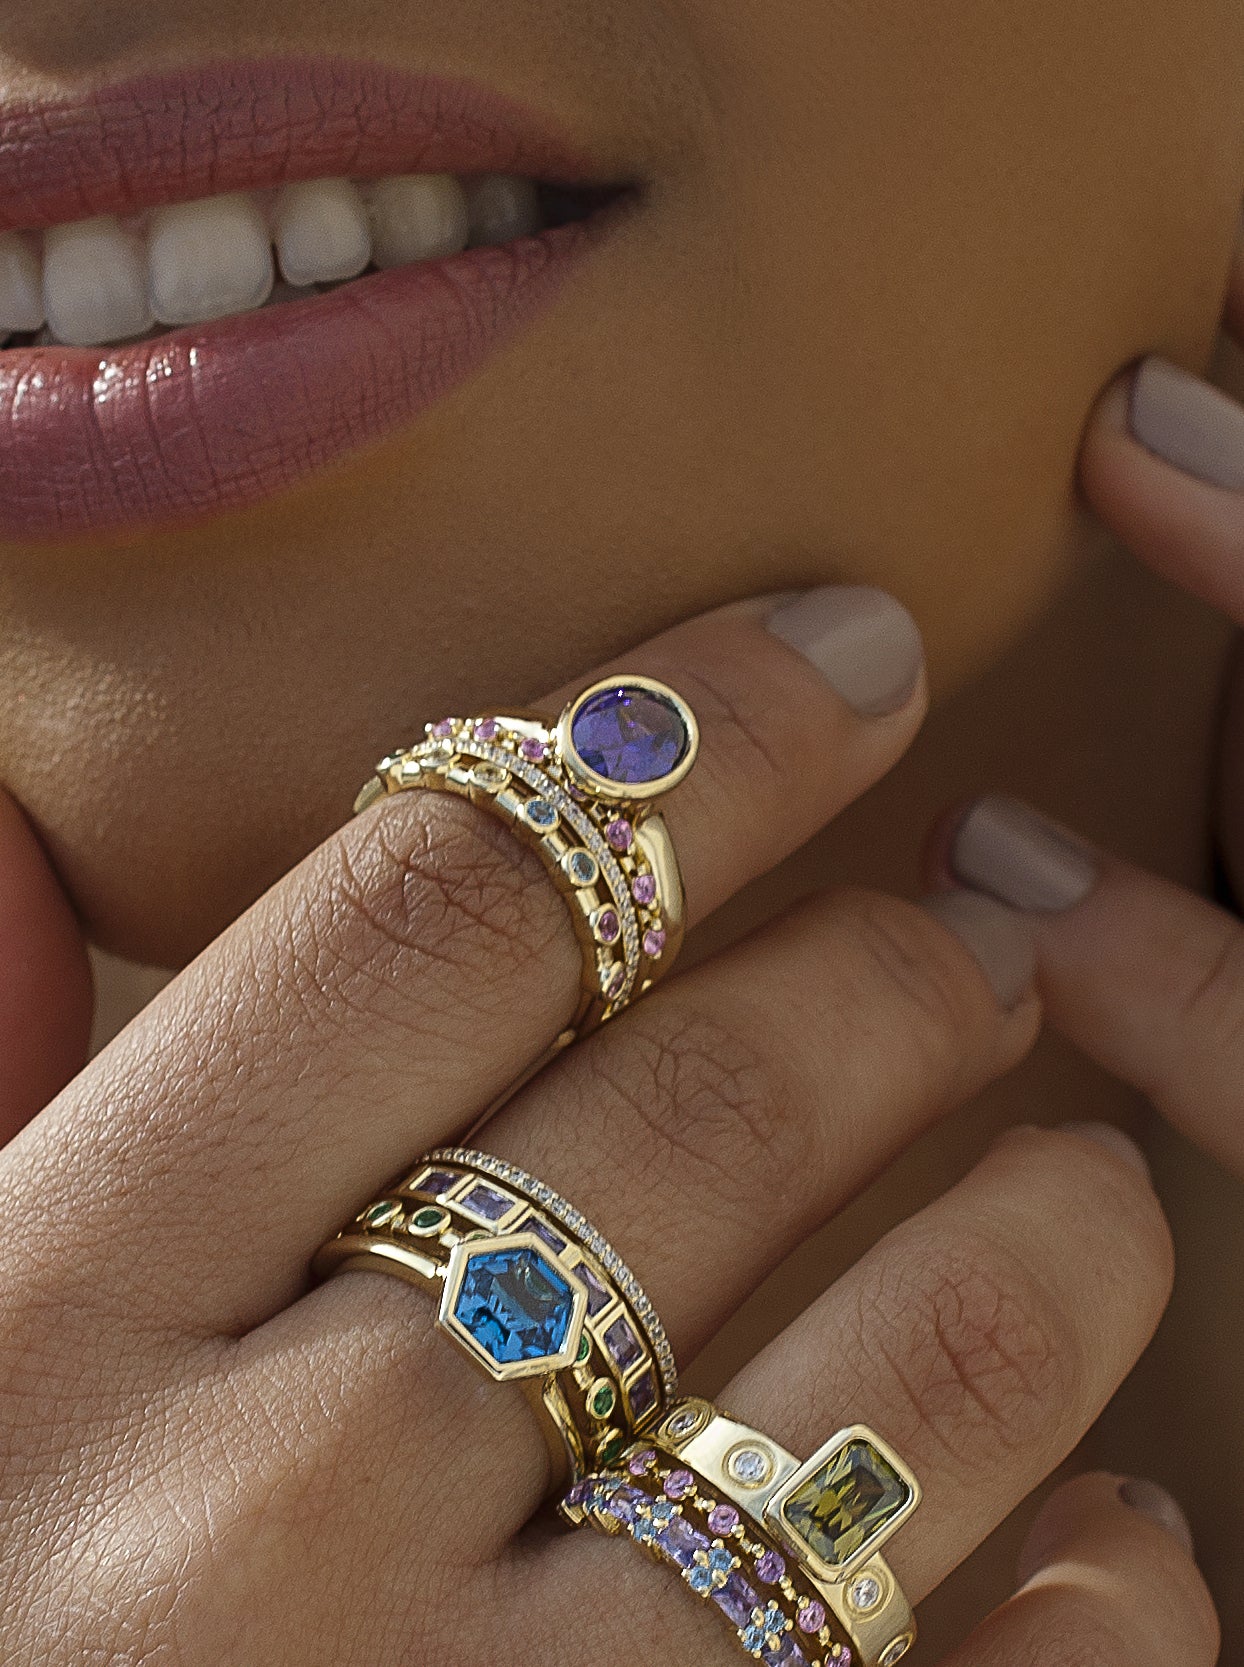 Rings with stones with oval central motif in purple tone